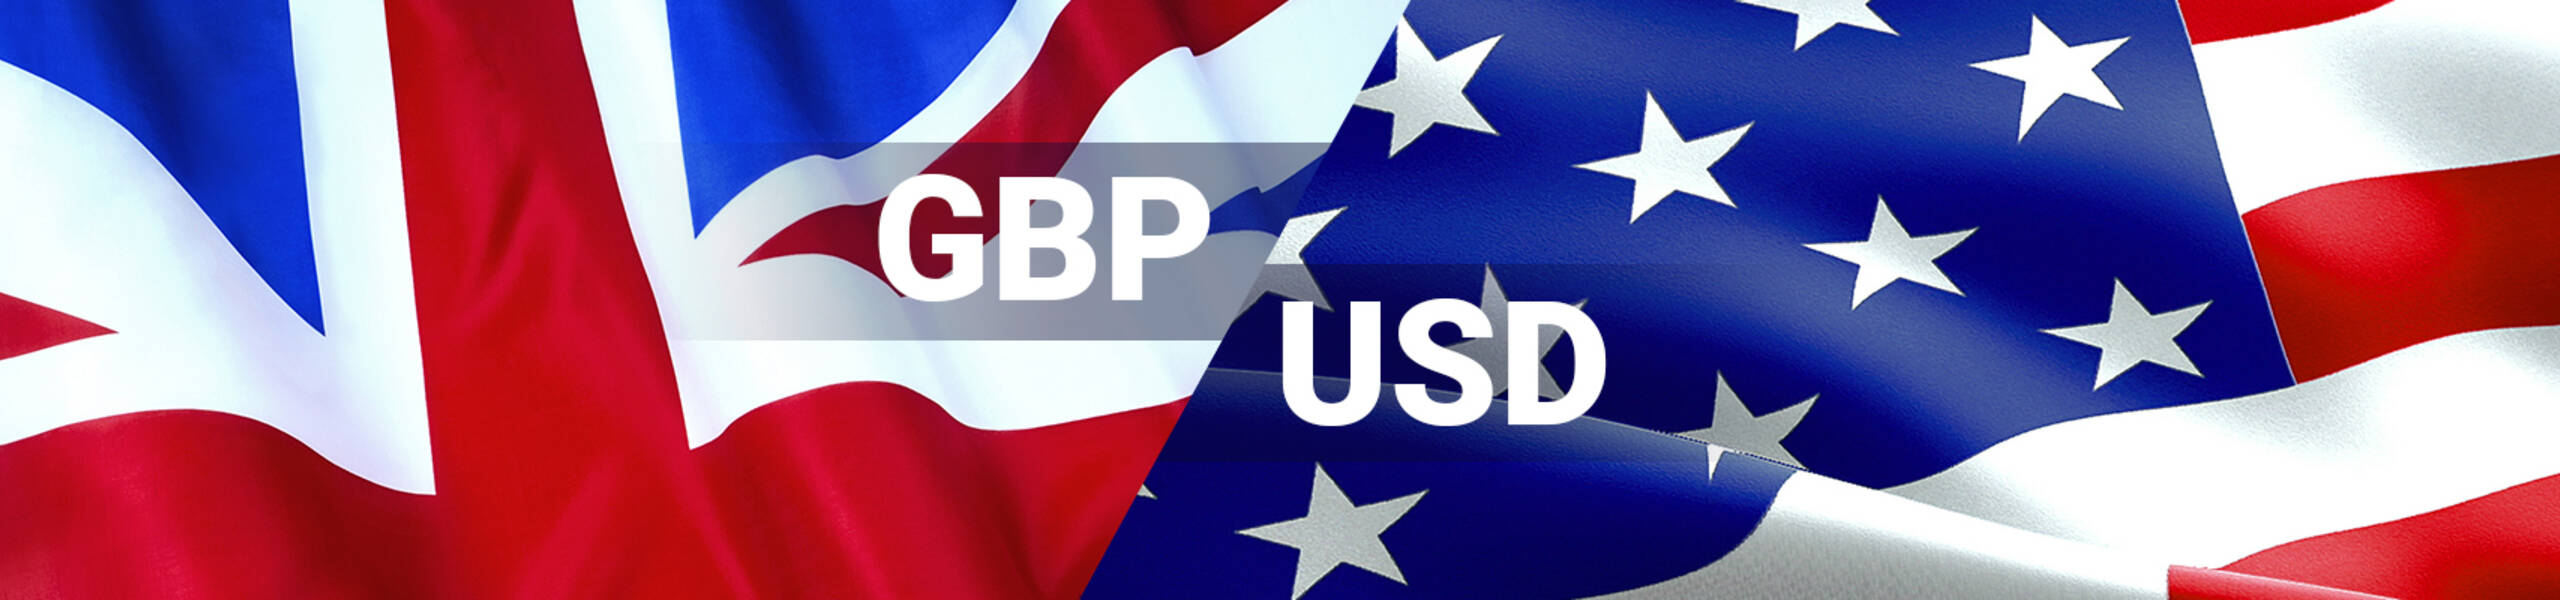 GBP/USD: trading in cloudy area